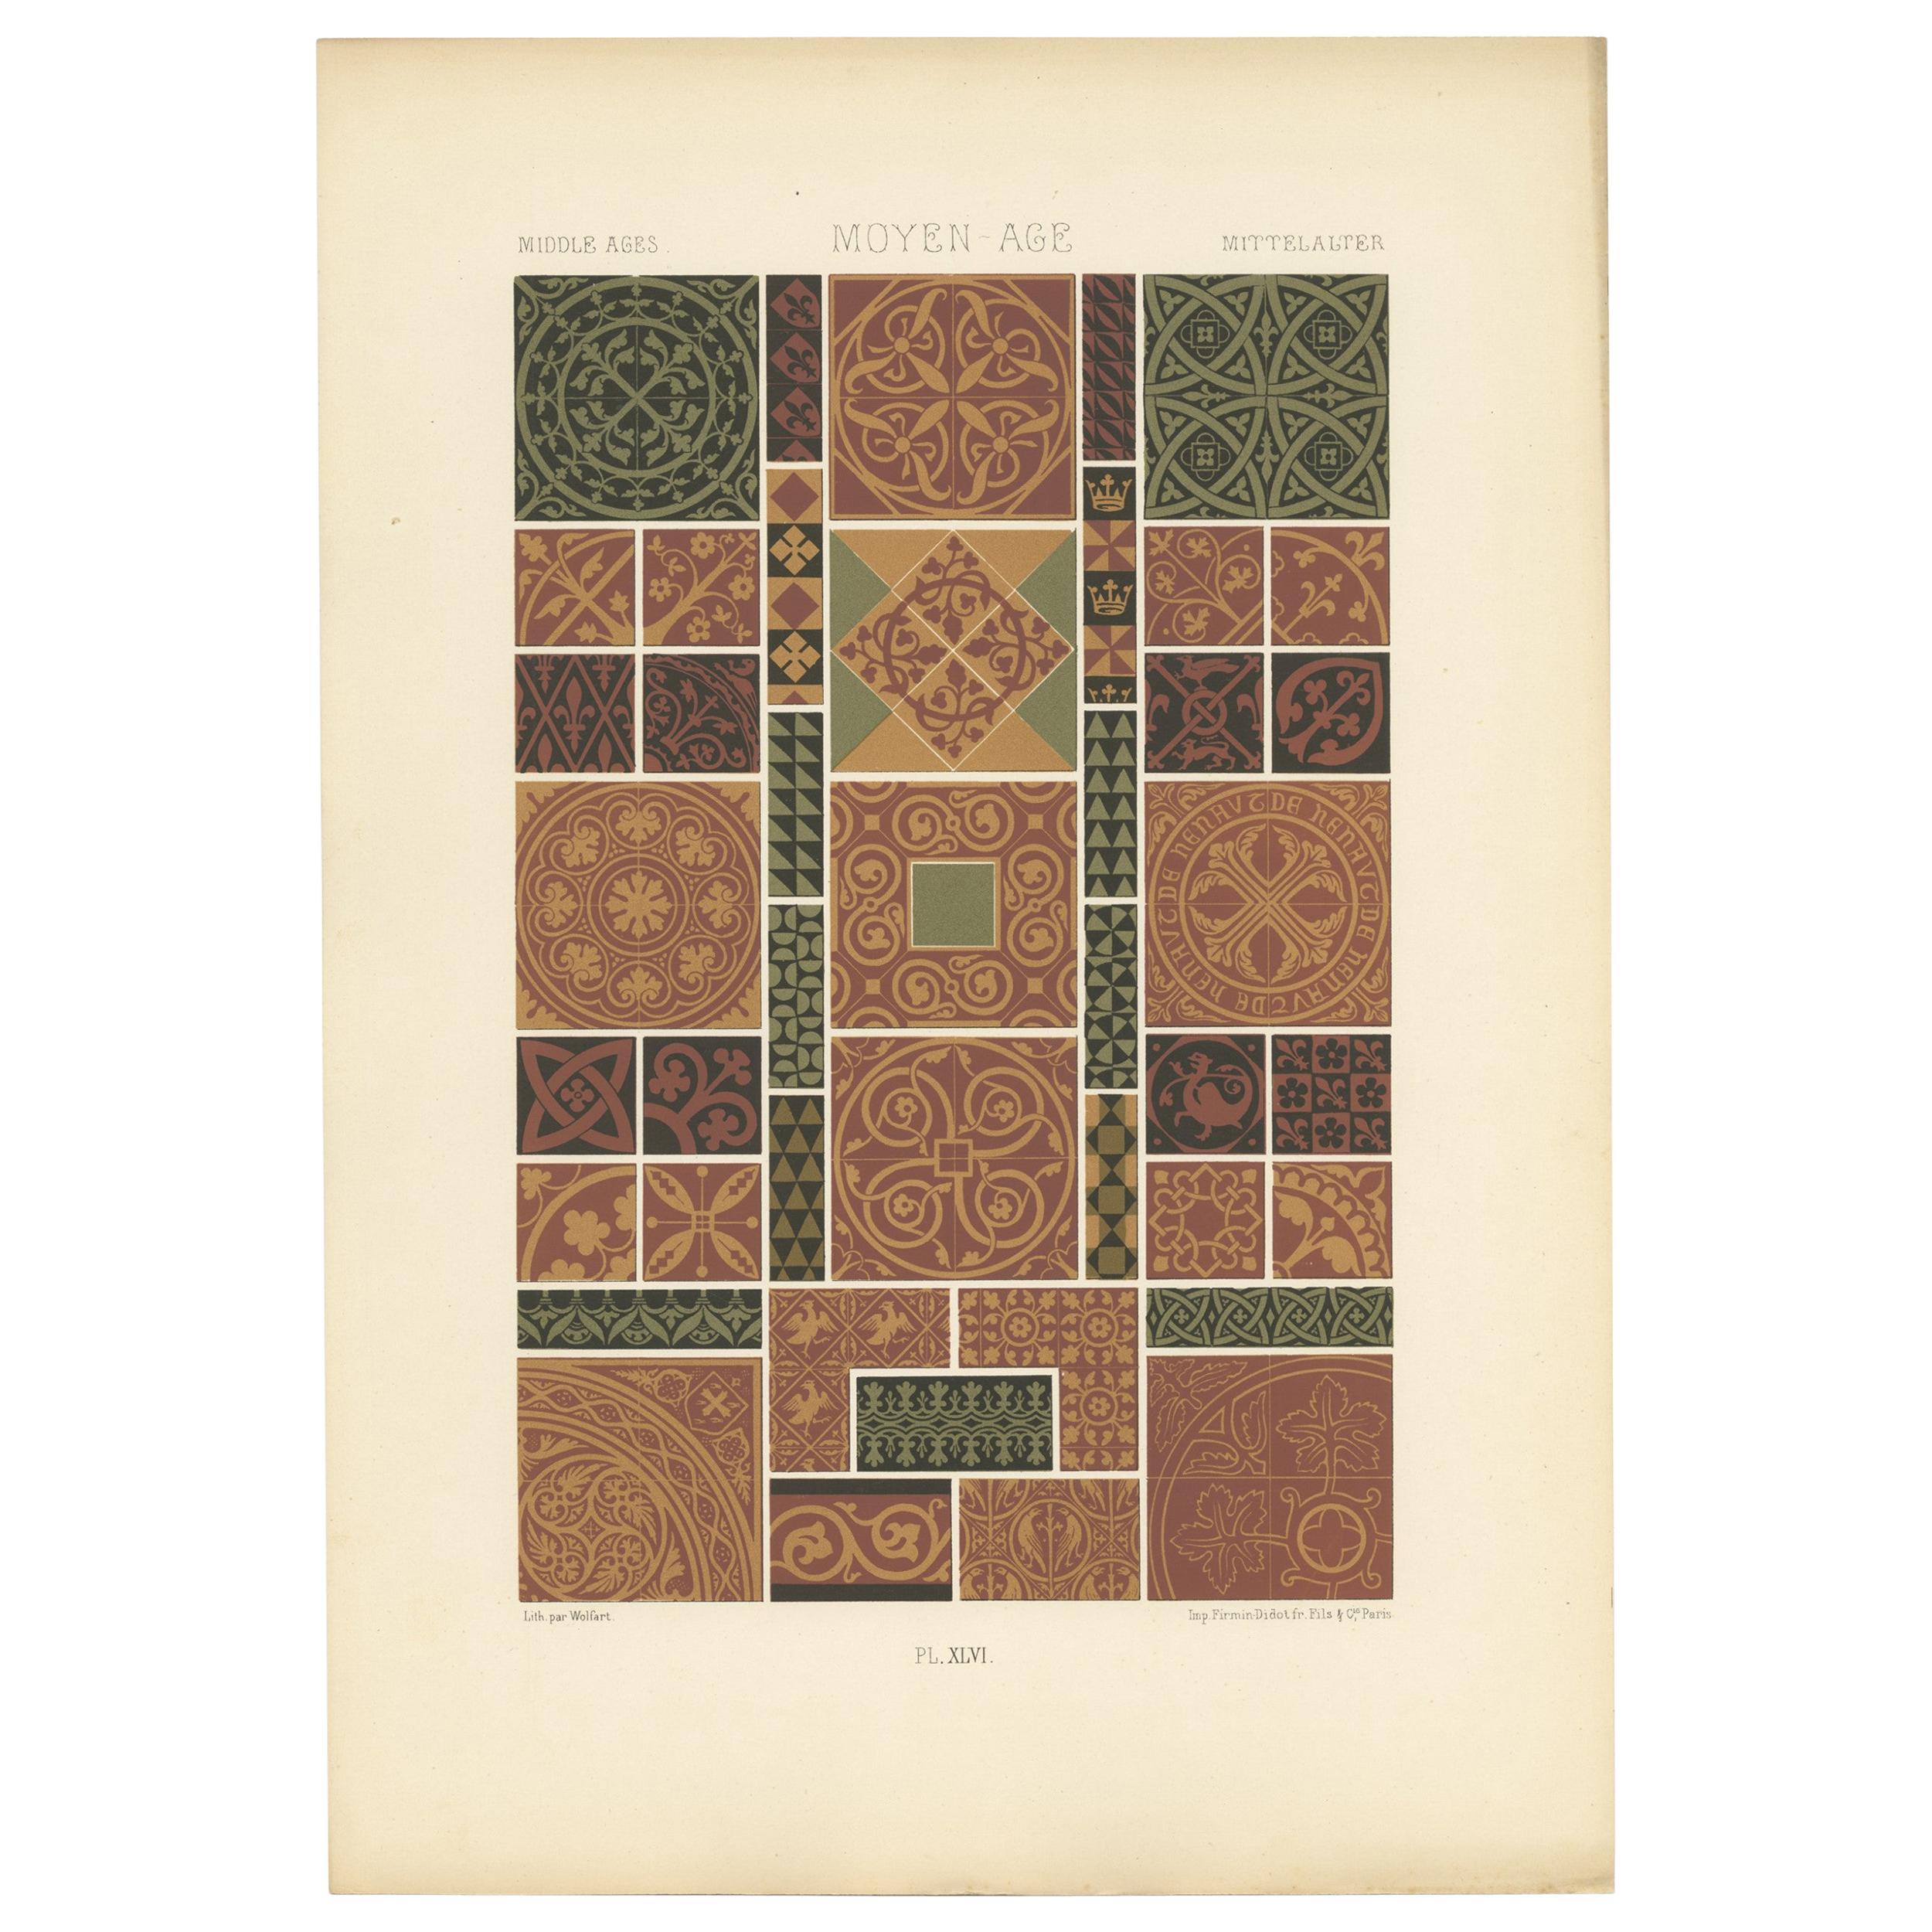 Pl. 46 Antique Print of Middle Ages Ornaments by Racinet, circa 1890